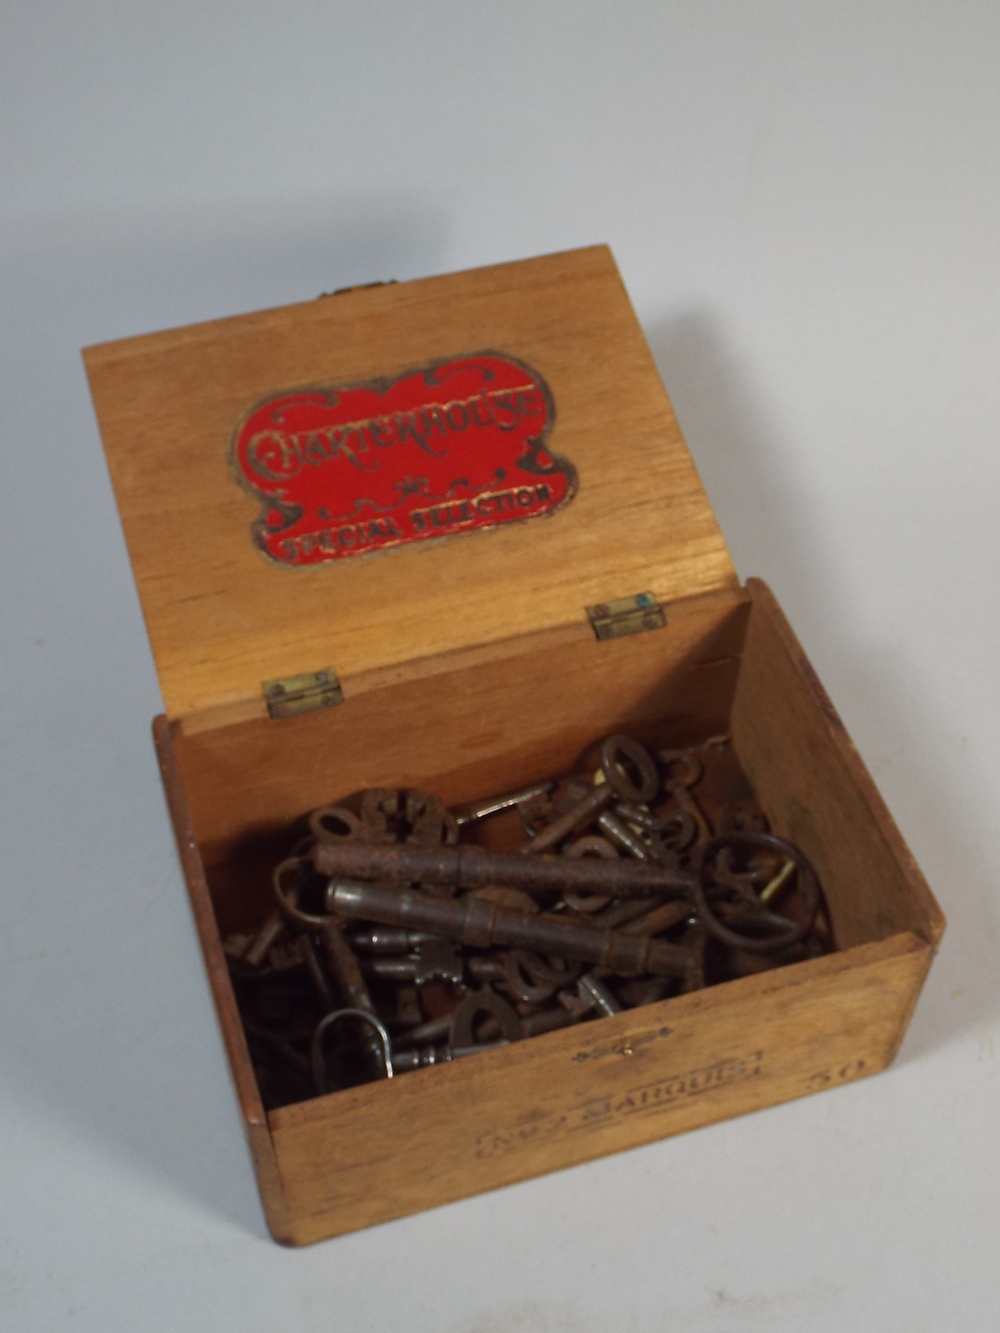 A Vintage Cigar Box Containing Collection of Old Keys